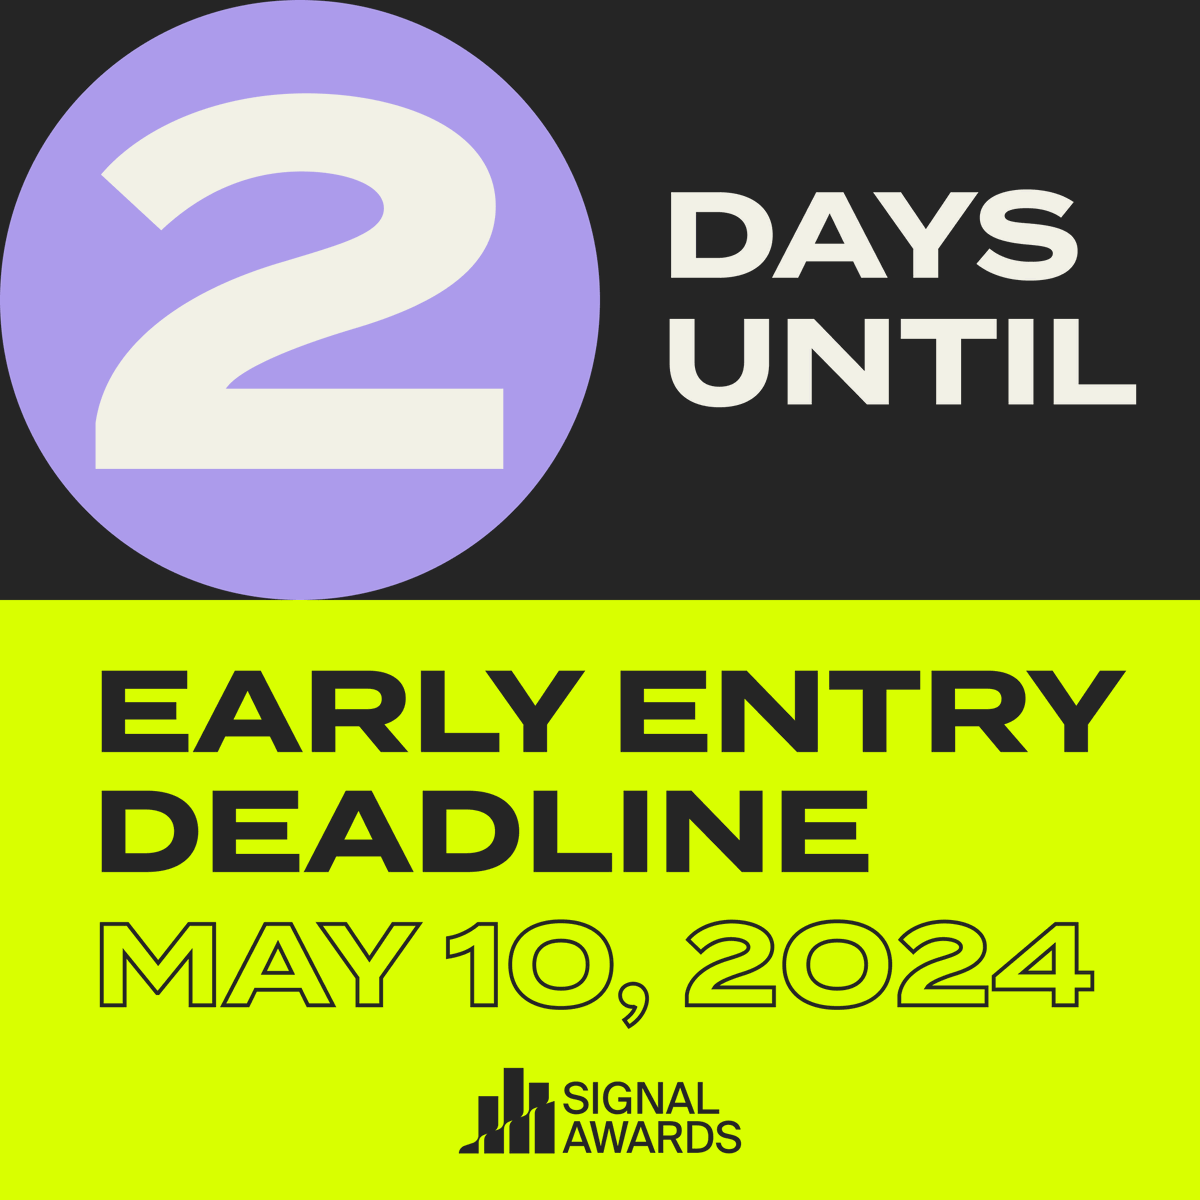 2 Days until the Signal Awards Early Entry Deadline!🏆💥 Submit your podcasts before Friday, May 10th at 11:59 PM PST to have your work recognized amongst the best podcasts being made today. 🎧